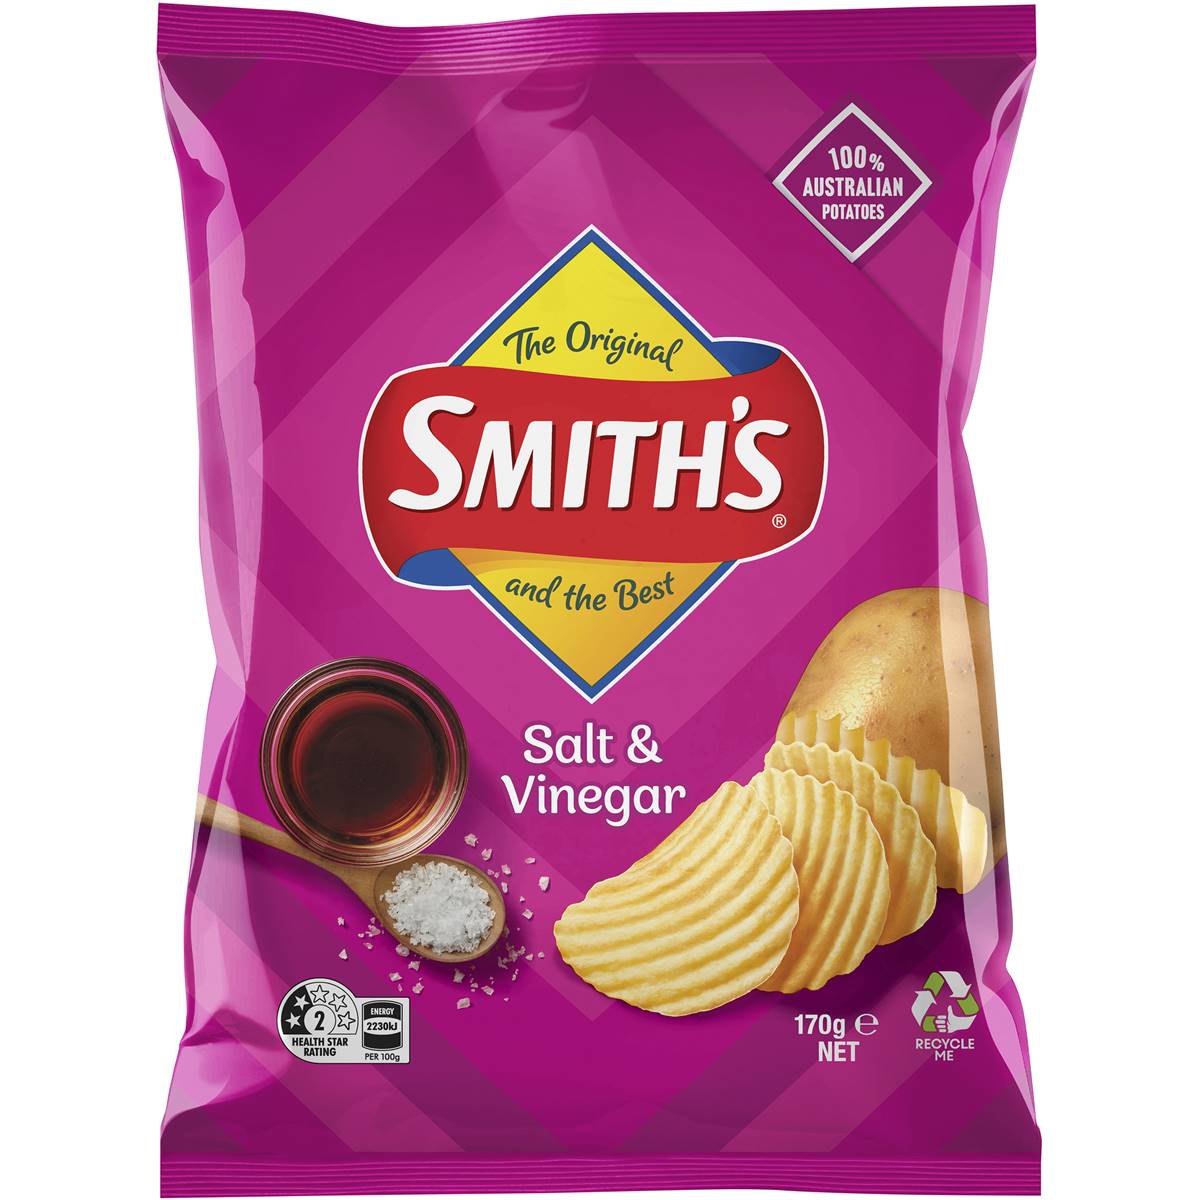 This Popular Potato Chip Has Been Recalled Due to Possible Plastic ...